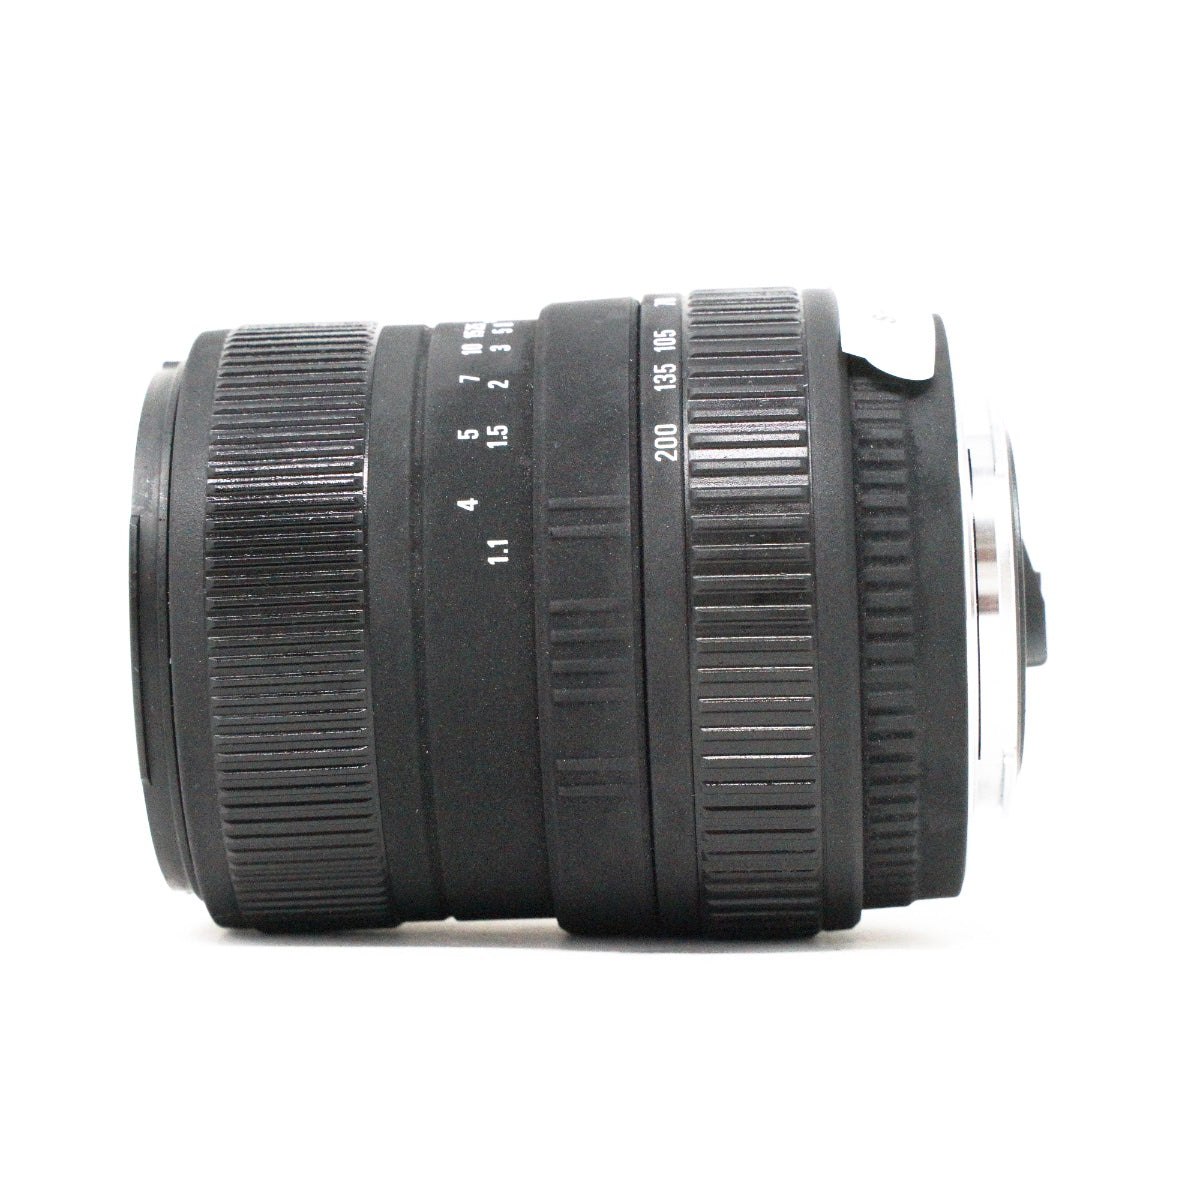 Used Sigma 55-200mm F4-5.6 DC lens in Pentax AF fitting